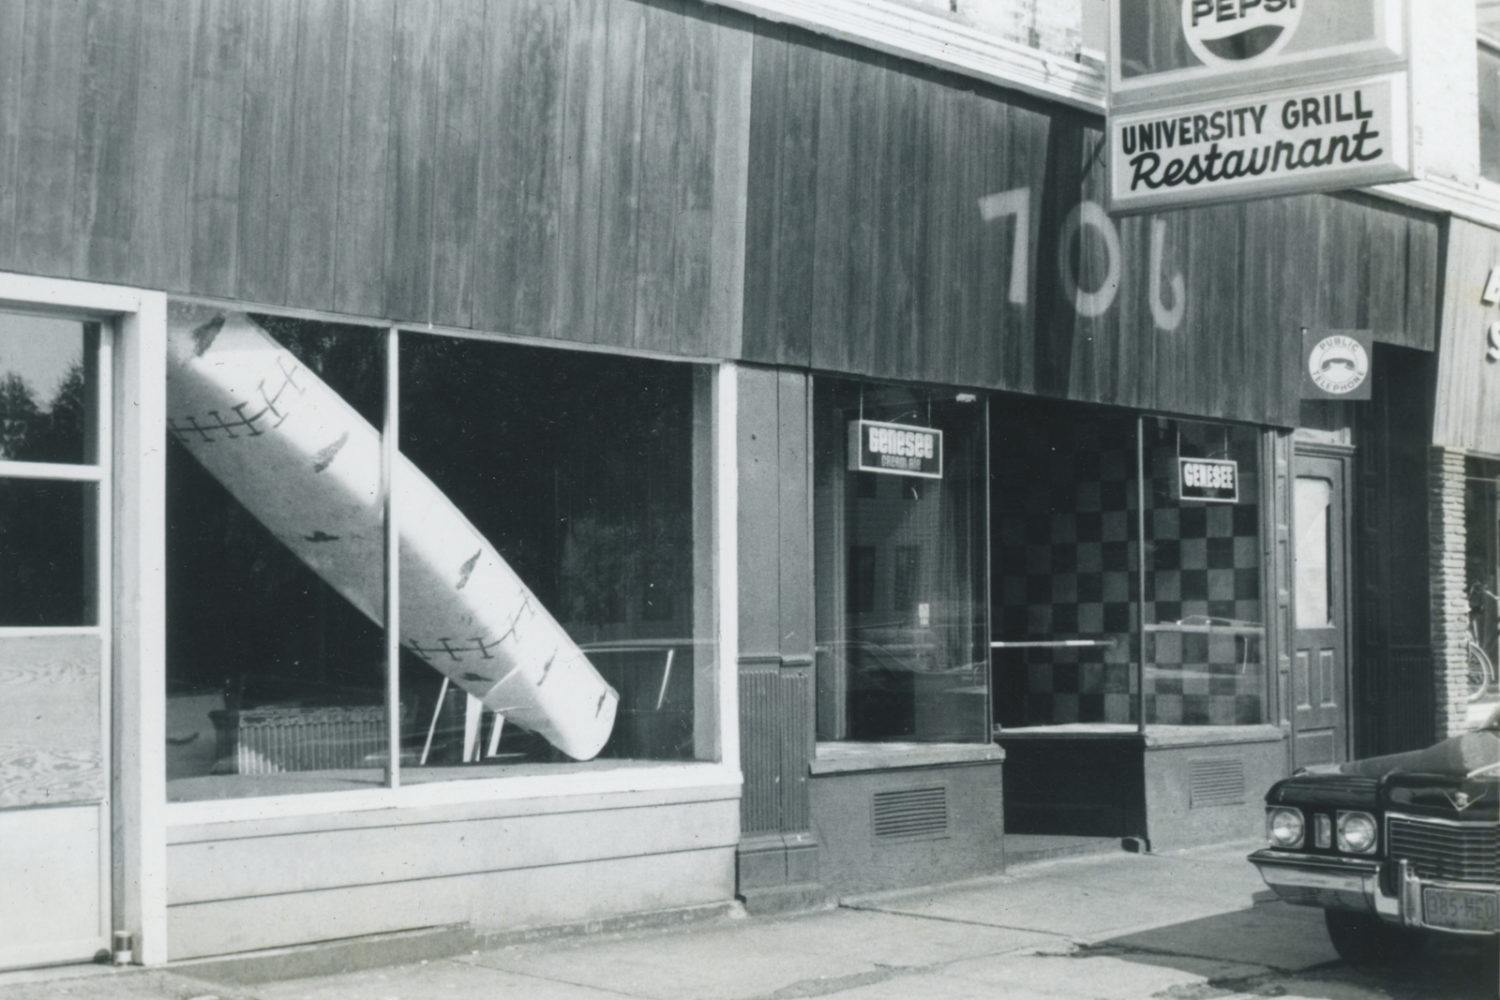 University Grill, next door to Towner's on University Avenue in Rochester, New York - photo by Paul Dodd 1976